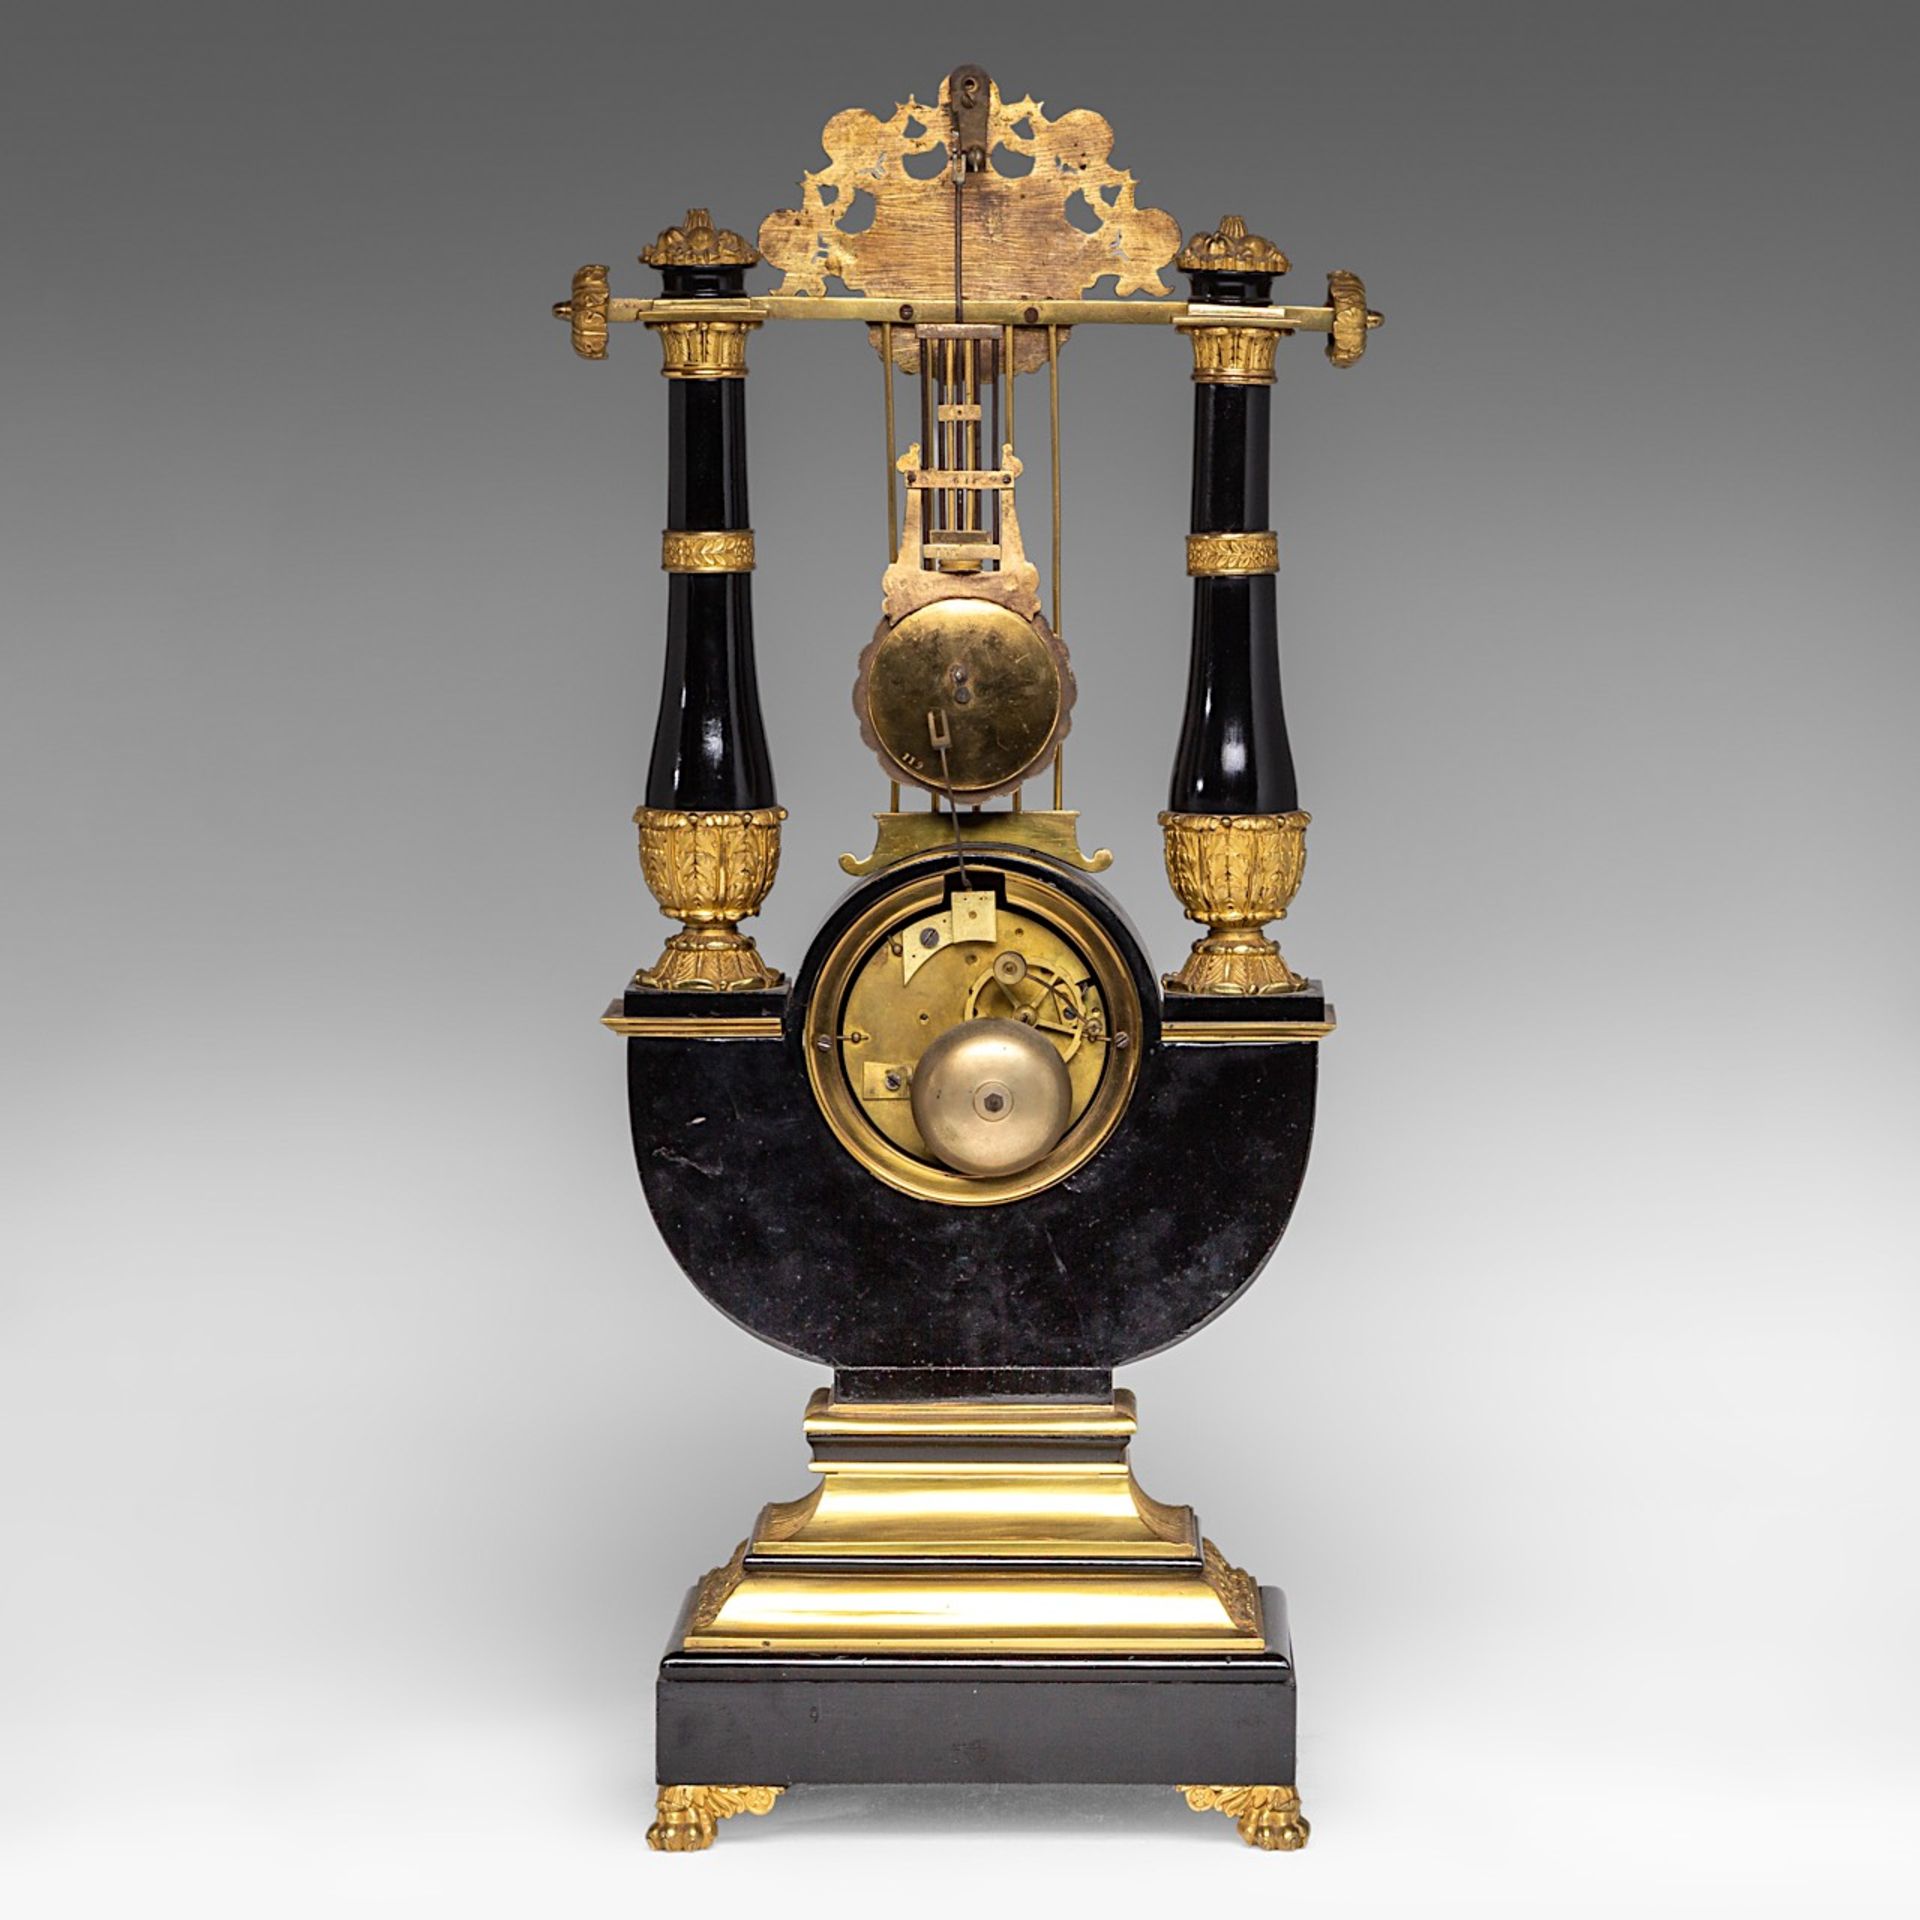 A French Restoration black lacquered and gilt bronze mounted lyre-shaped mantle clock, H 58 cm - Image 4 of 8